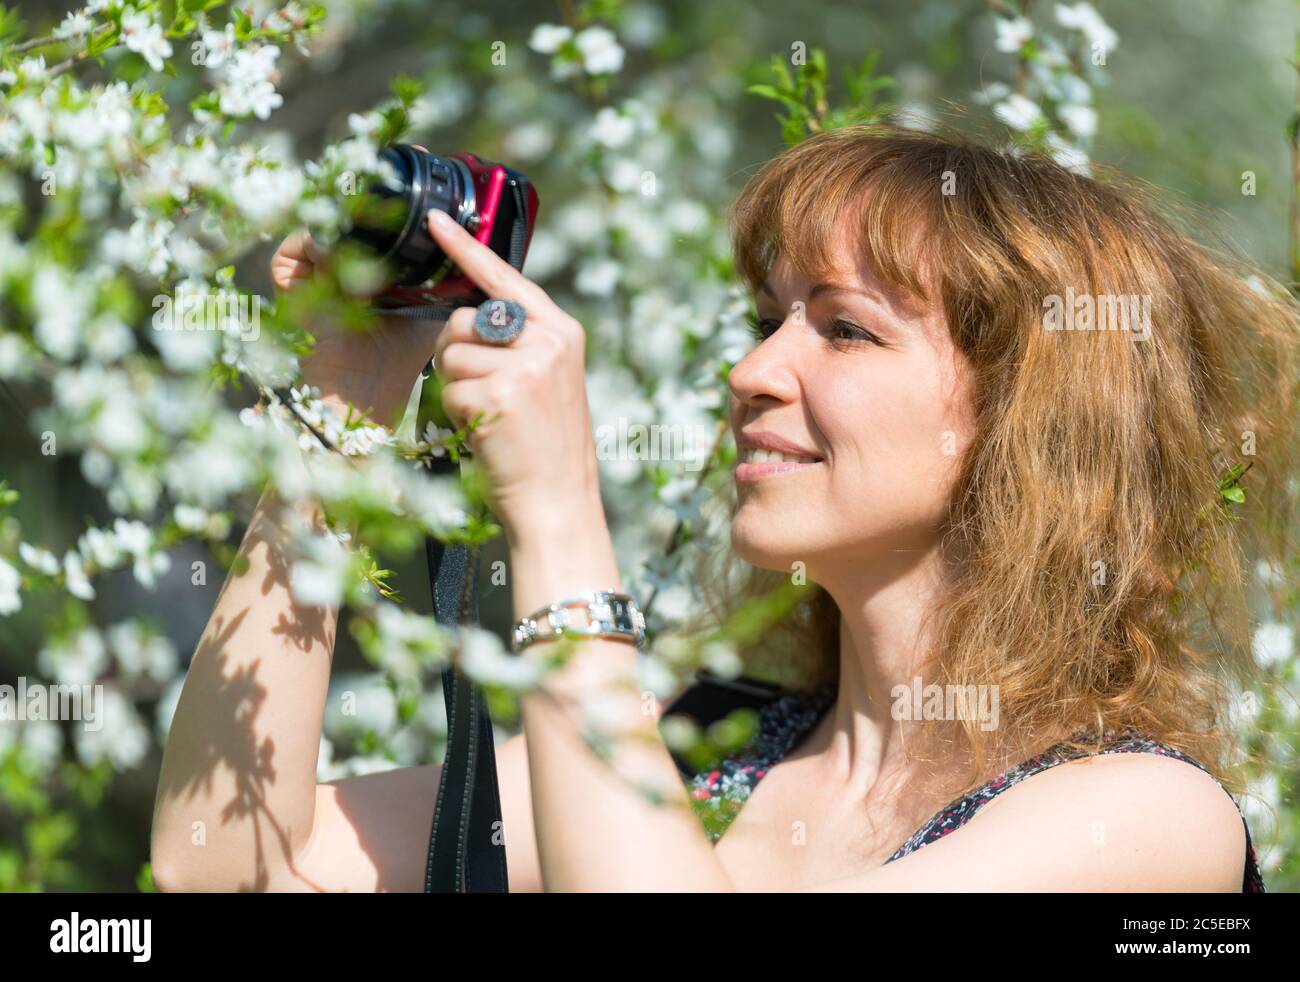 Young woman photographs cherry blossom on a spring day Stock Photo